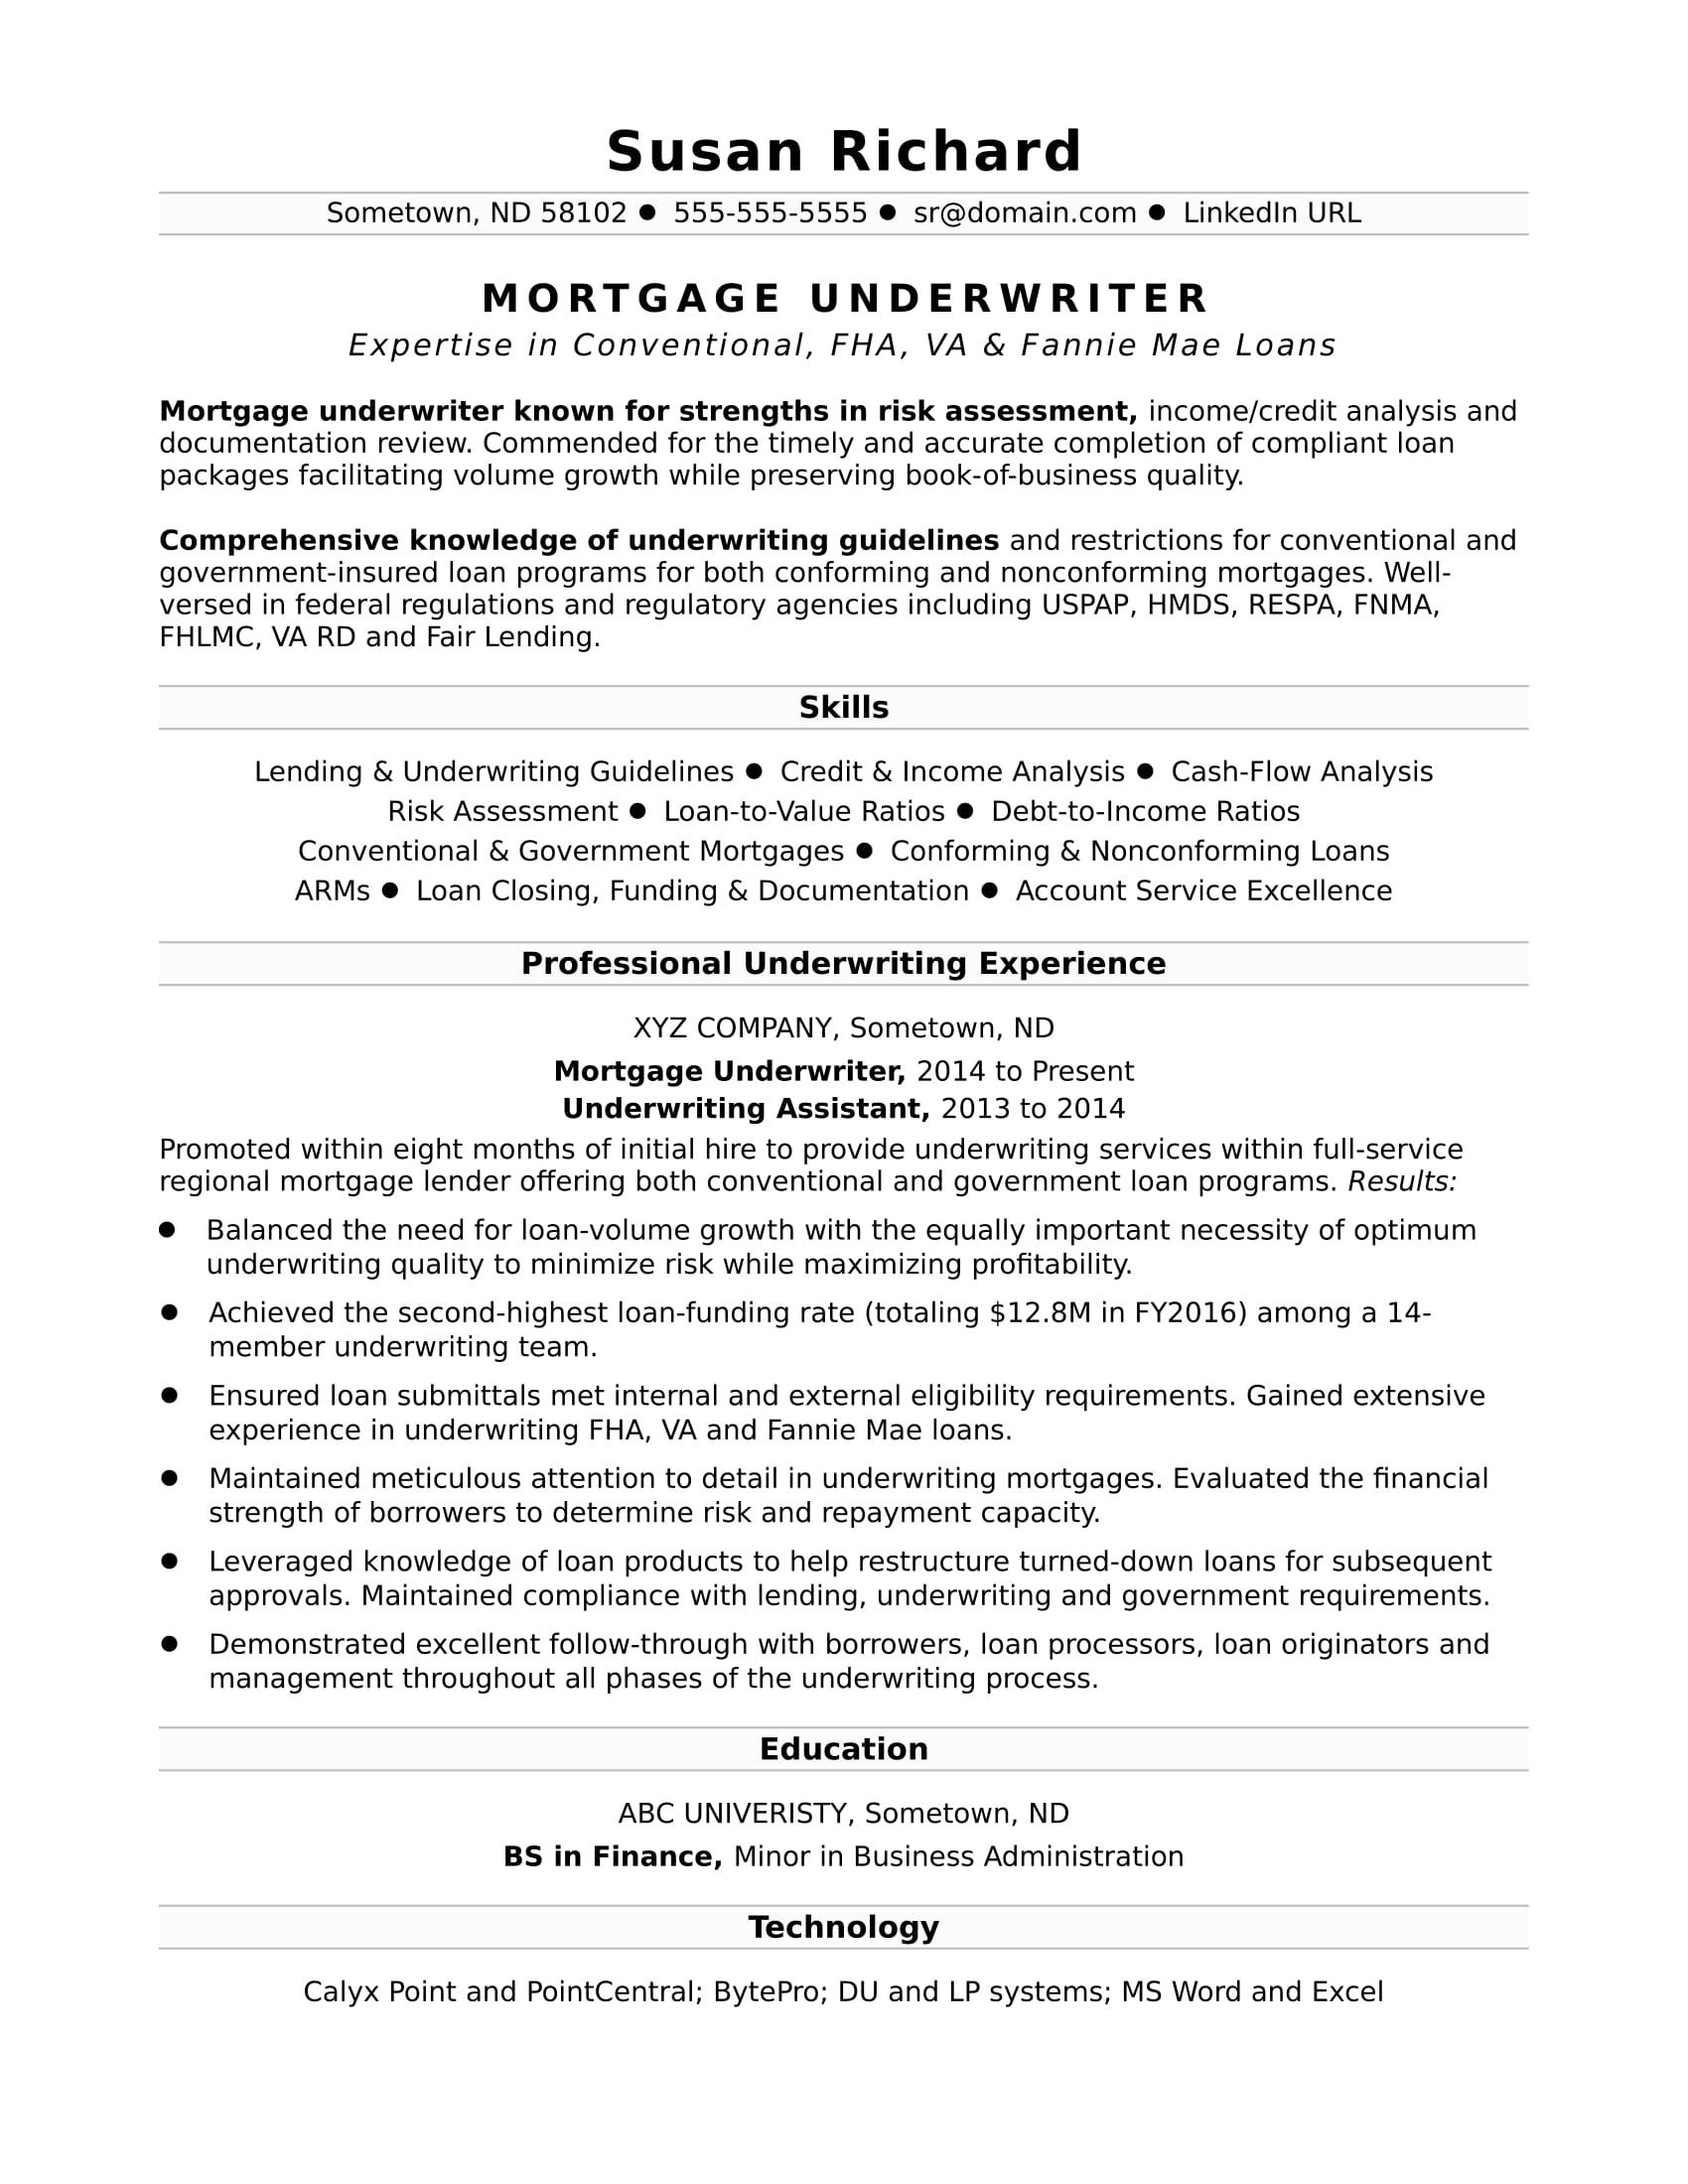 Microsoft Word Resume Cover Letter Template - Free Resume Search In India Unique New Programmer Resume Lovely